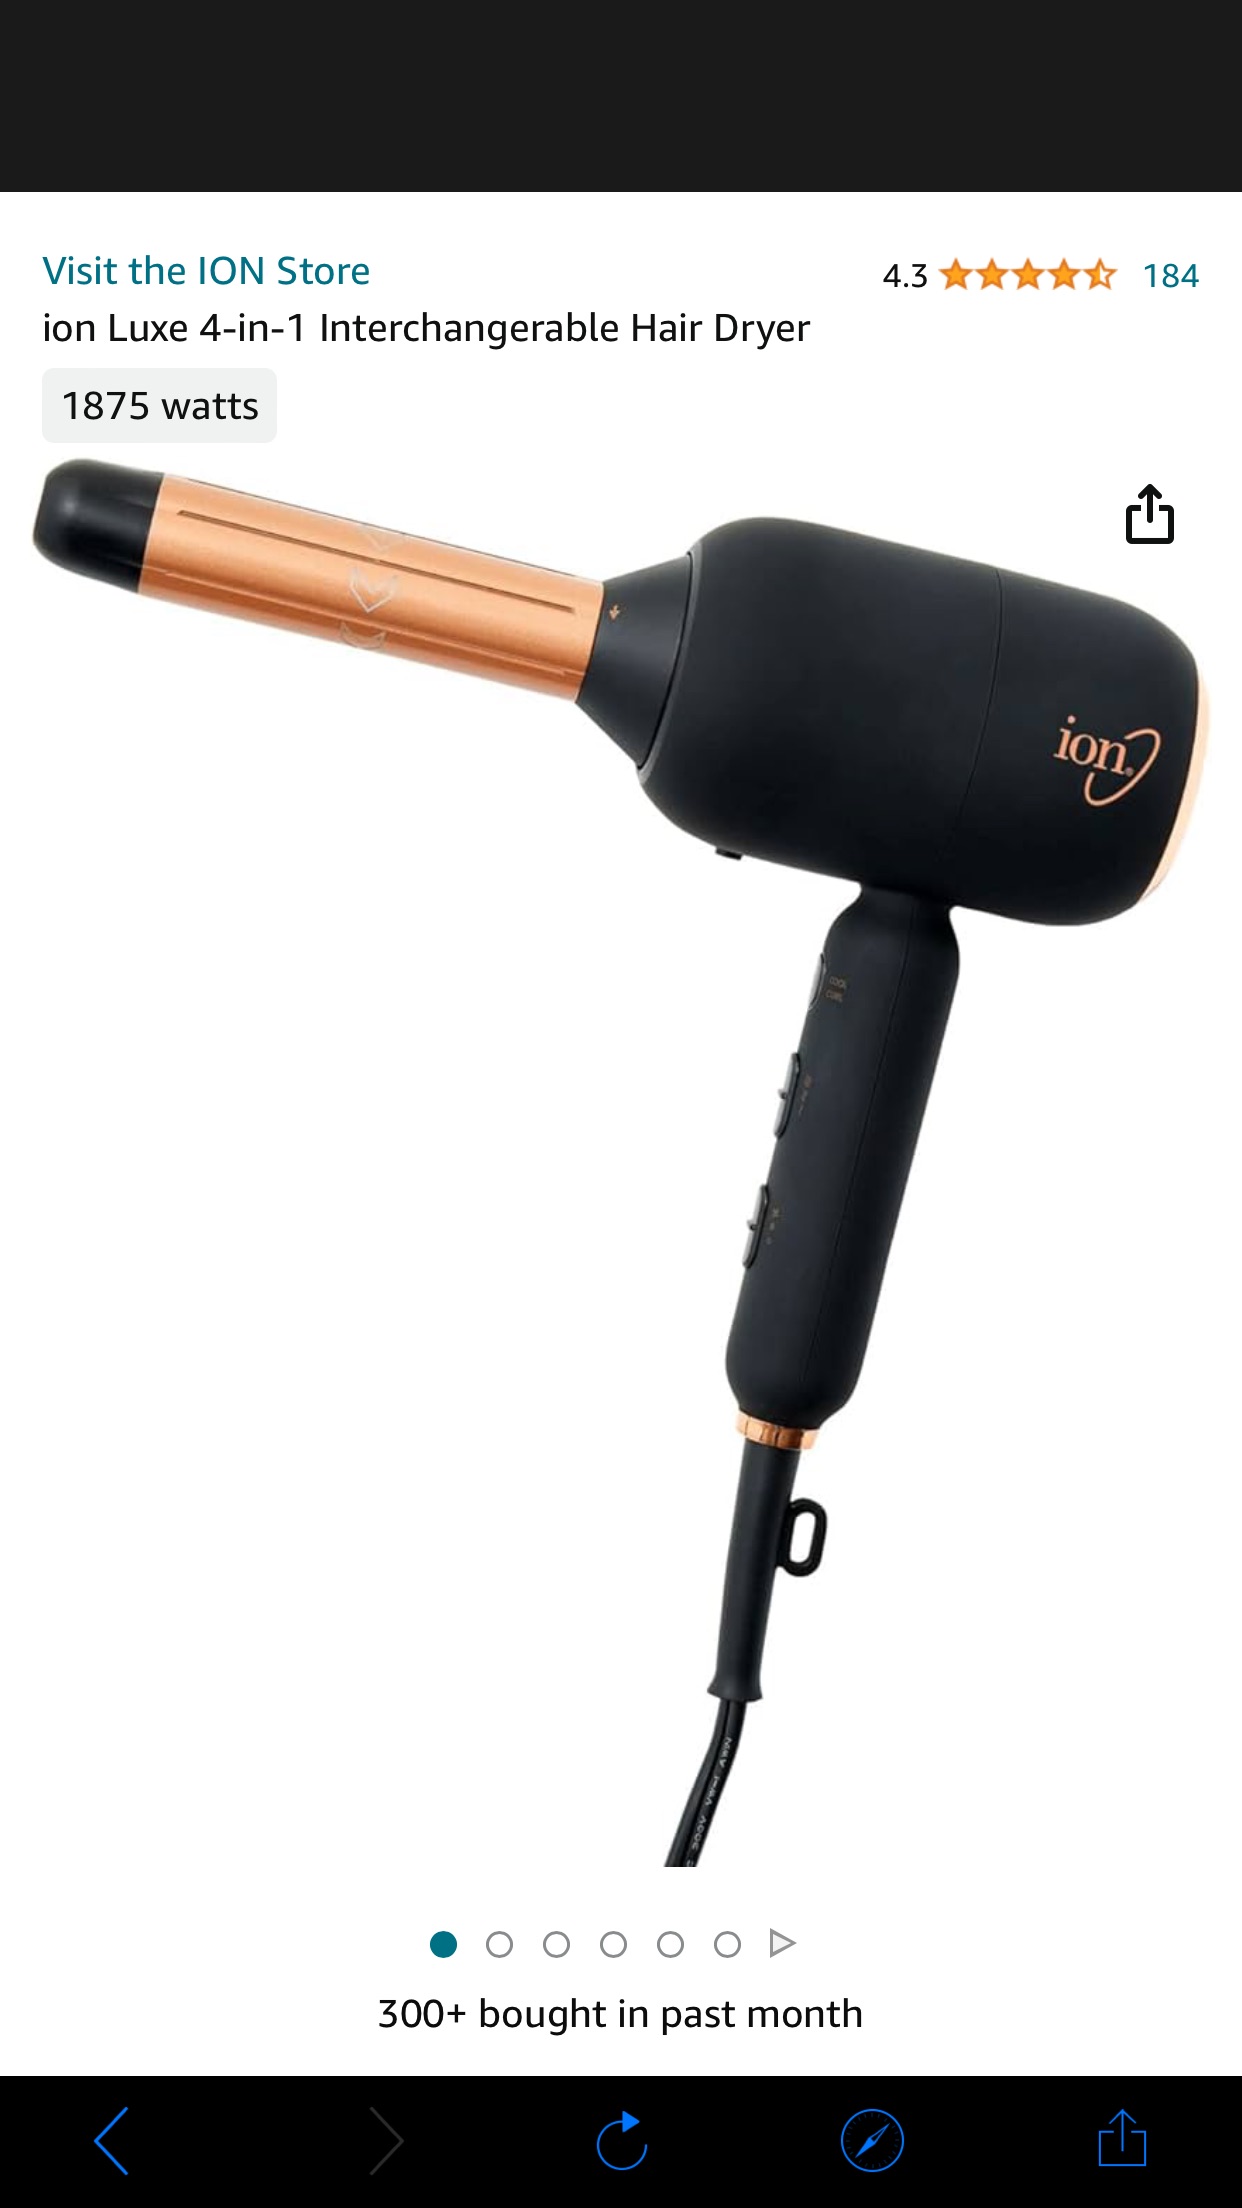 Amazon.com : ion Luxe 4-in-1 Autowrap™ Airstyler - Interchangerable Hair Dryer & Curler for All Hair Types